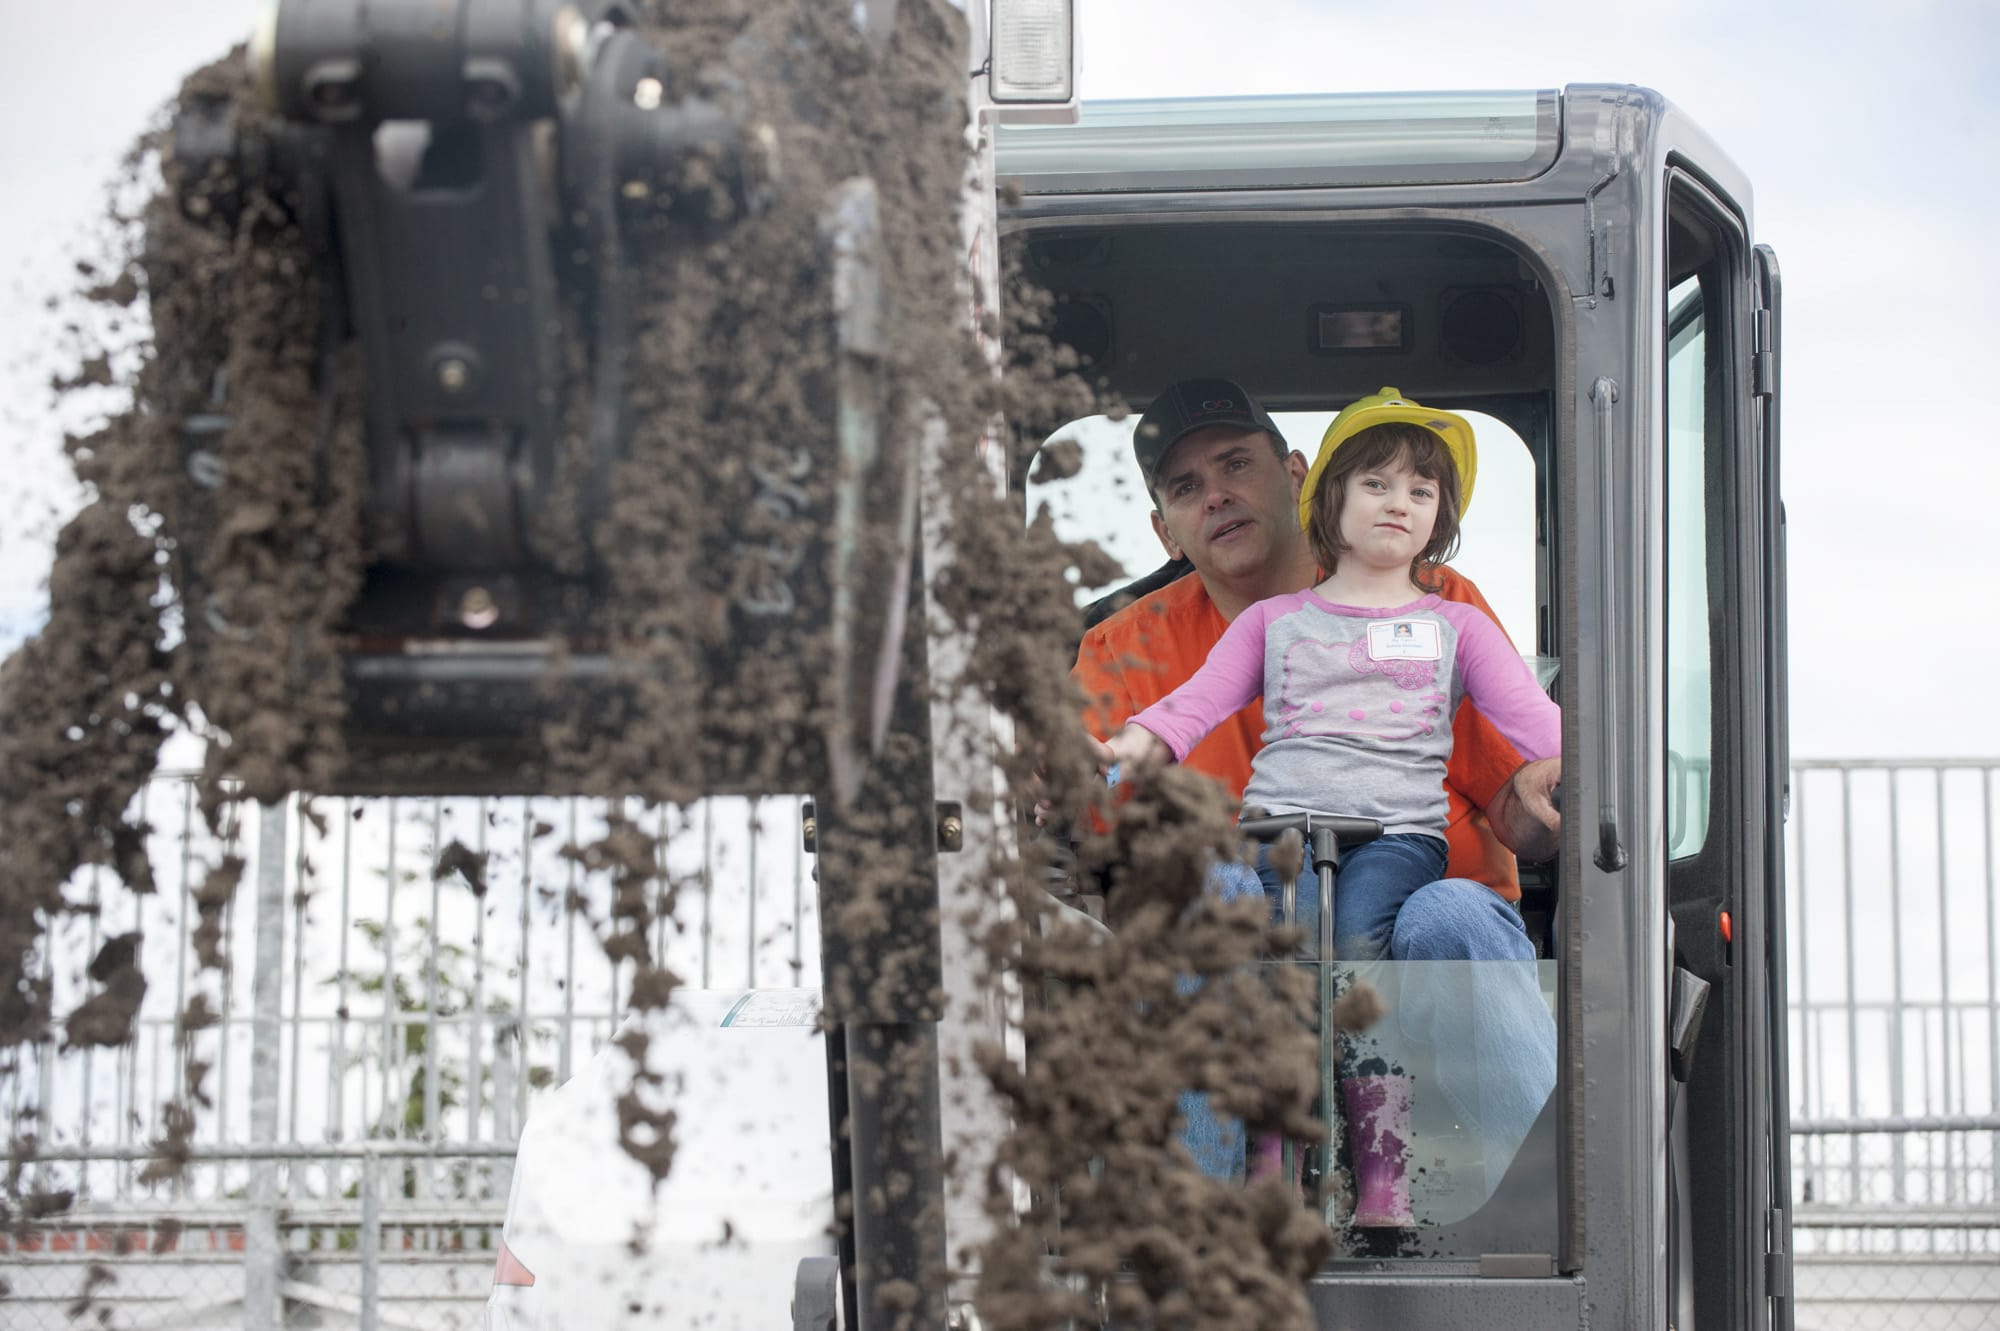 Burton Elementary school student Ashley Keniston 5, gets a turn to operate an earth moving machine at the preview day for Dozer Days at the Clark County Fairgrounds in Ridgefield Friday May 20, 2016. Students from Evergreen public schools got a chance to participate in the Dozer Days Event.